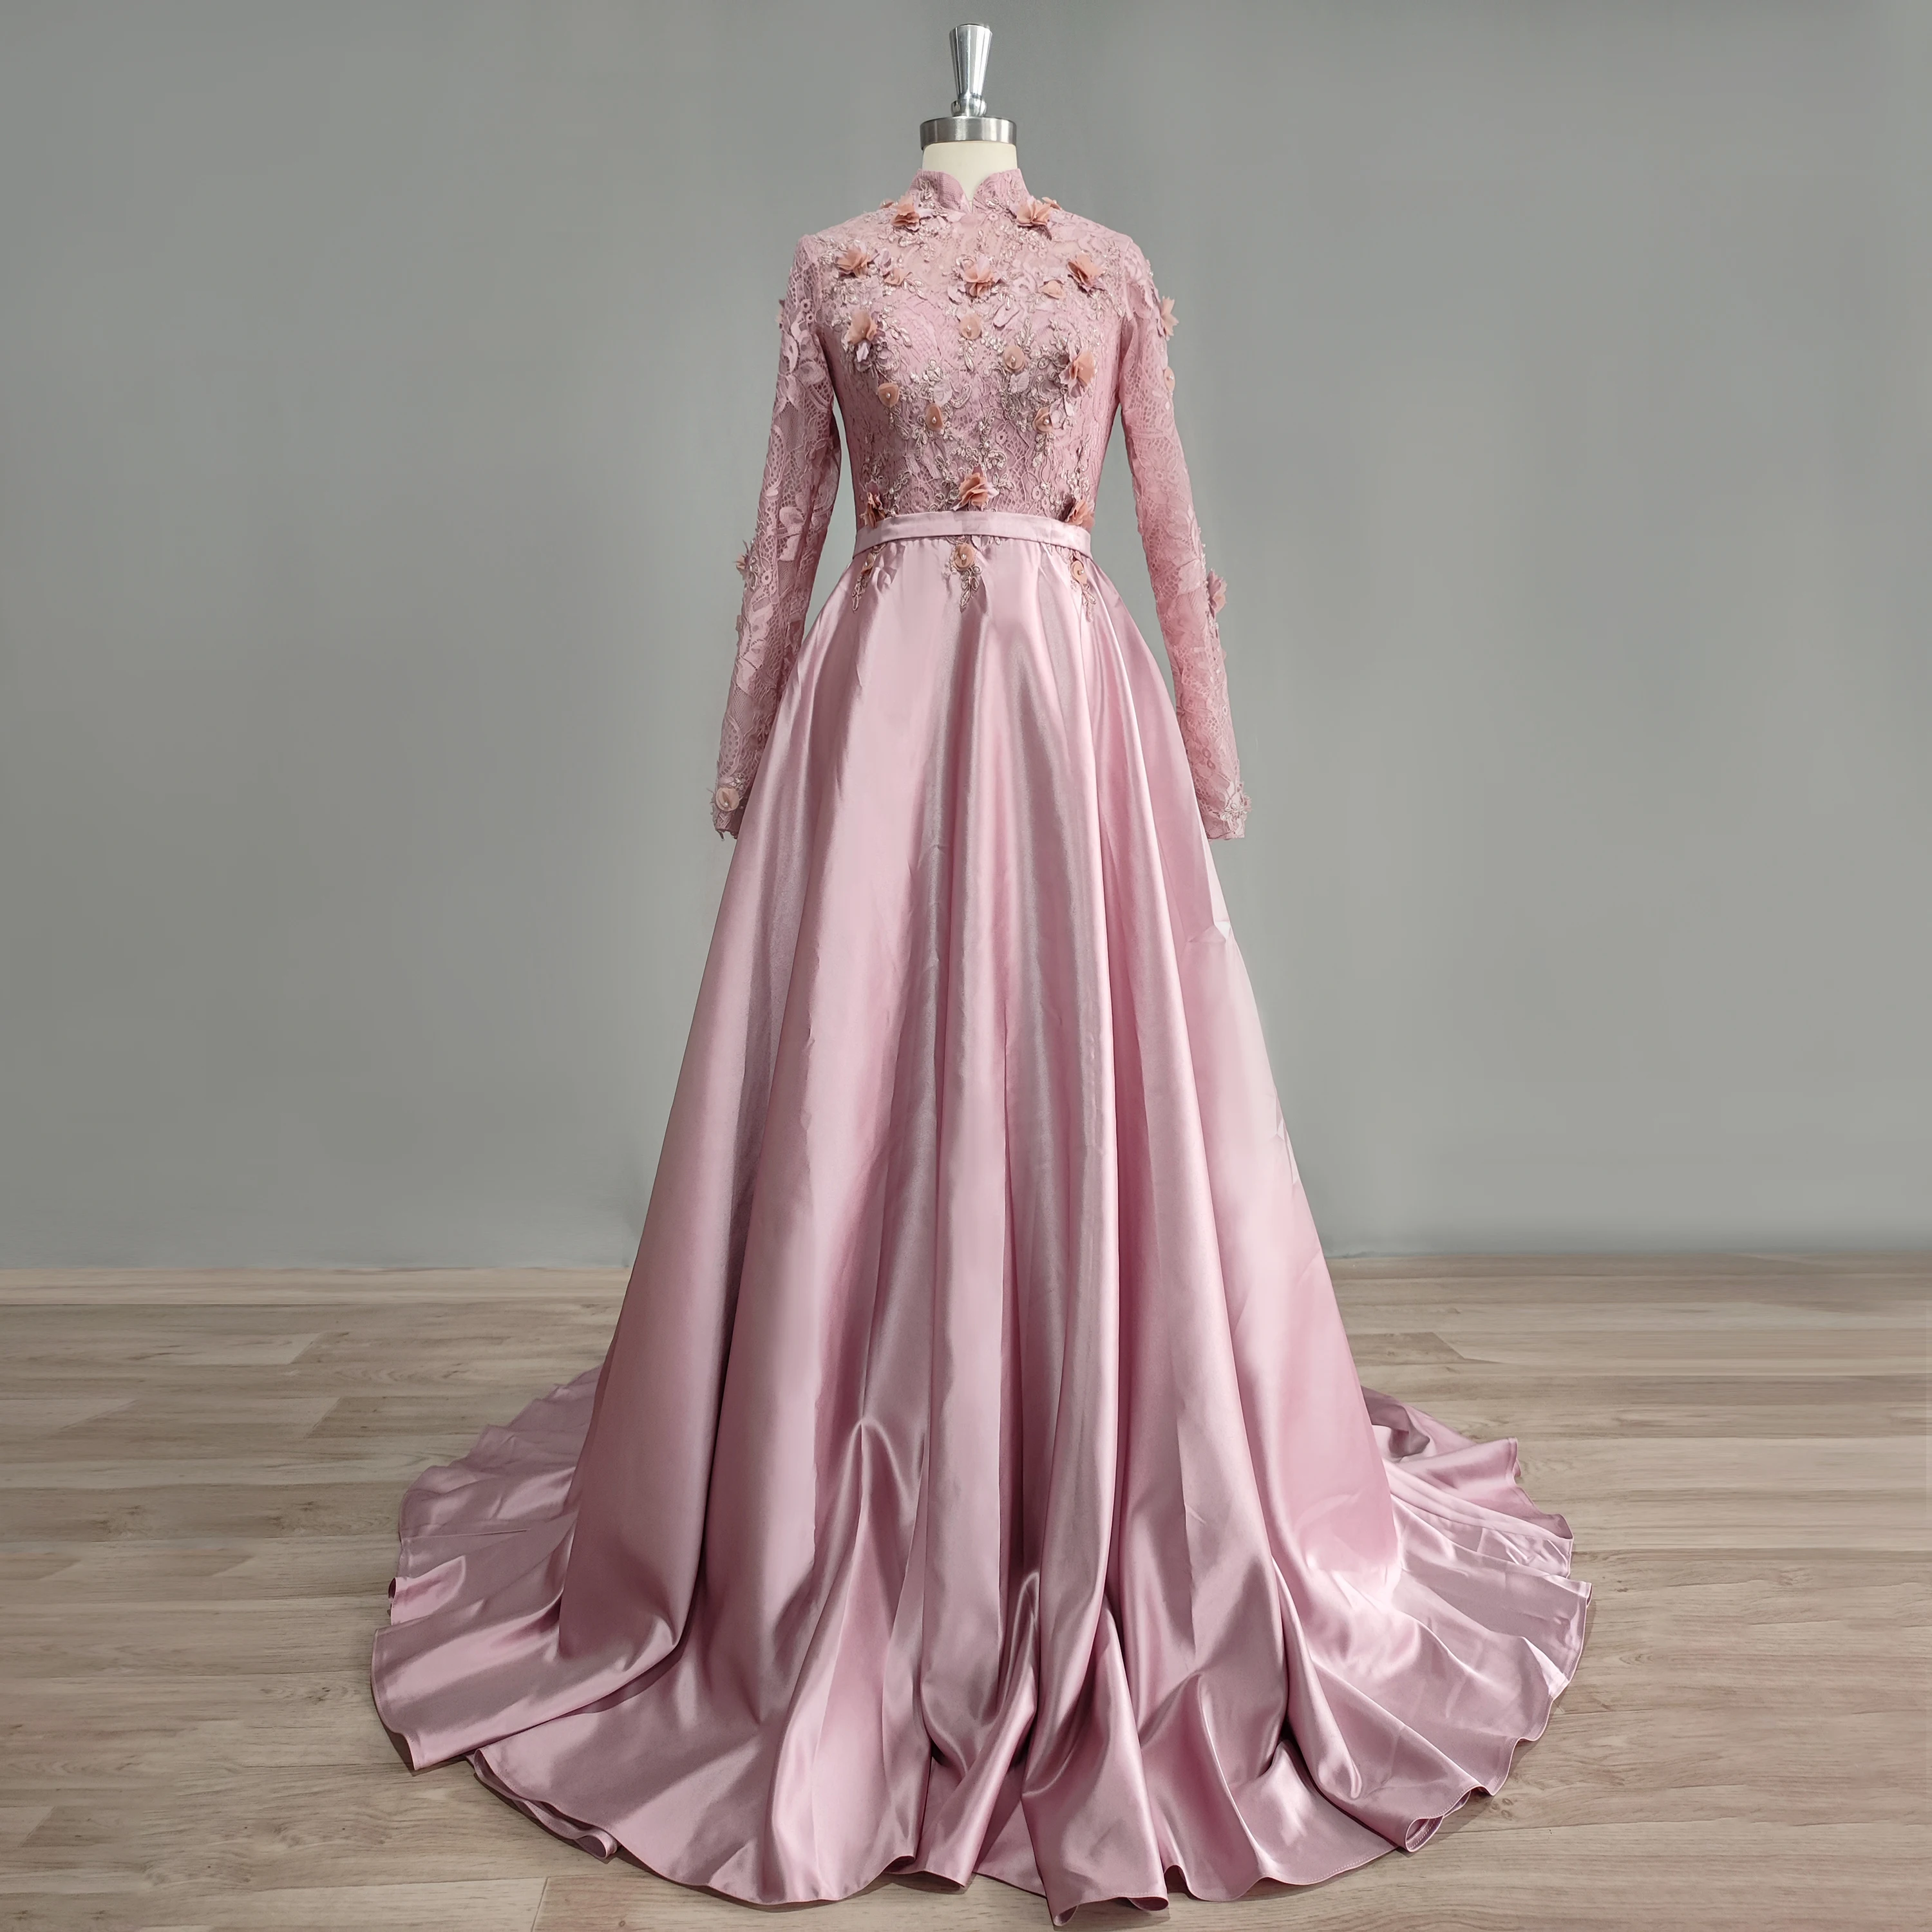 DIDEYTTAWL Real Photos Dusty Rose Long Sleeve Evening Dress Lace Flowers High Neck A Line Satin Prom Gown Saudi Arabia